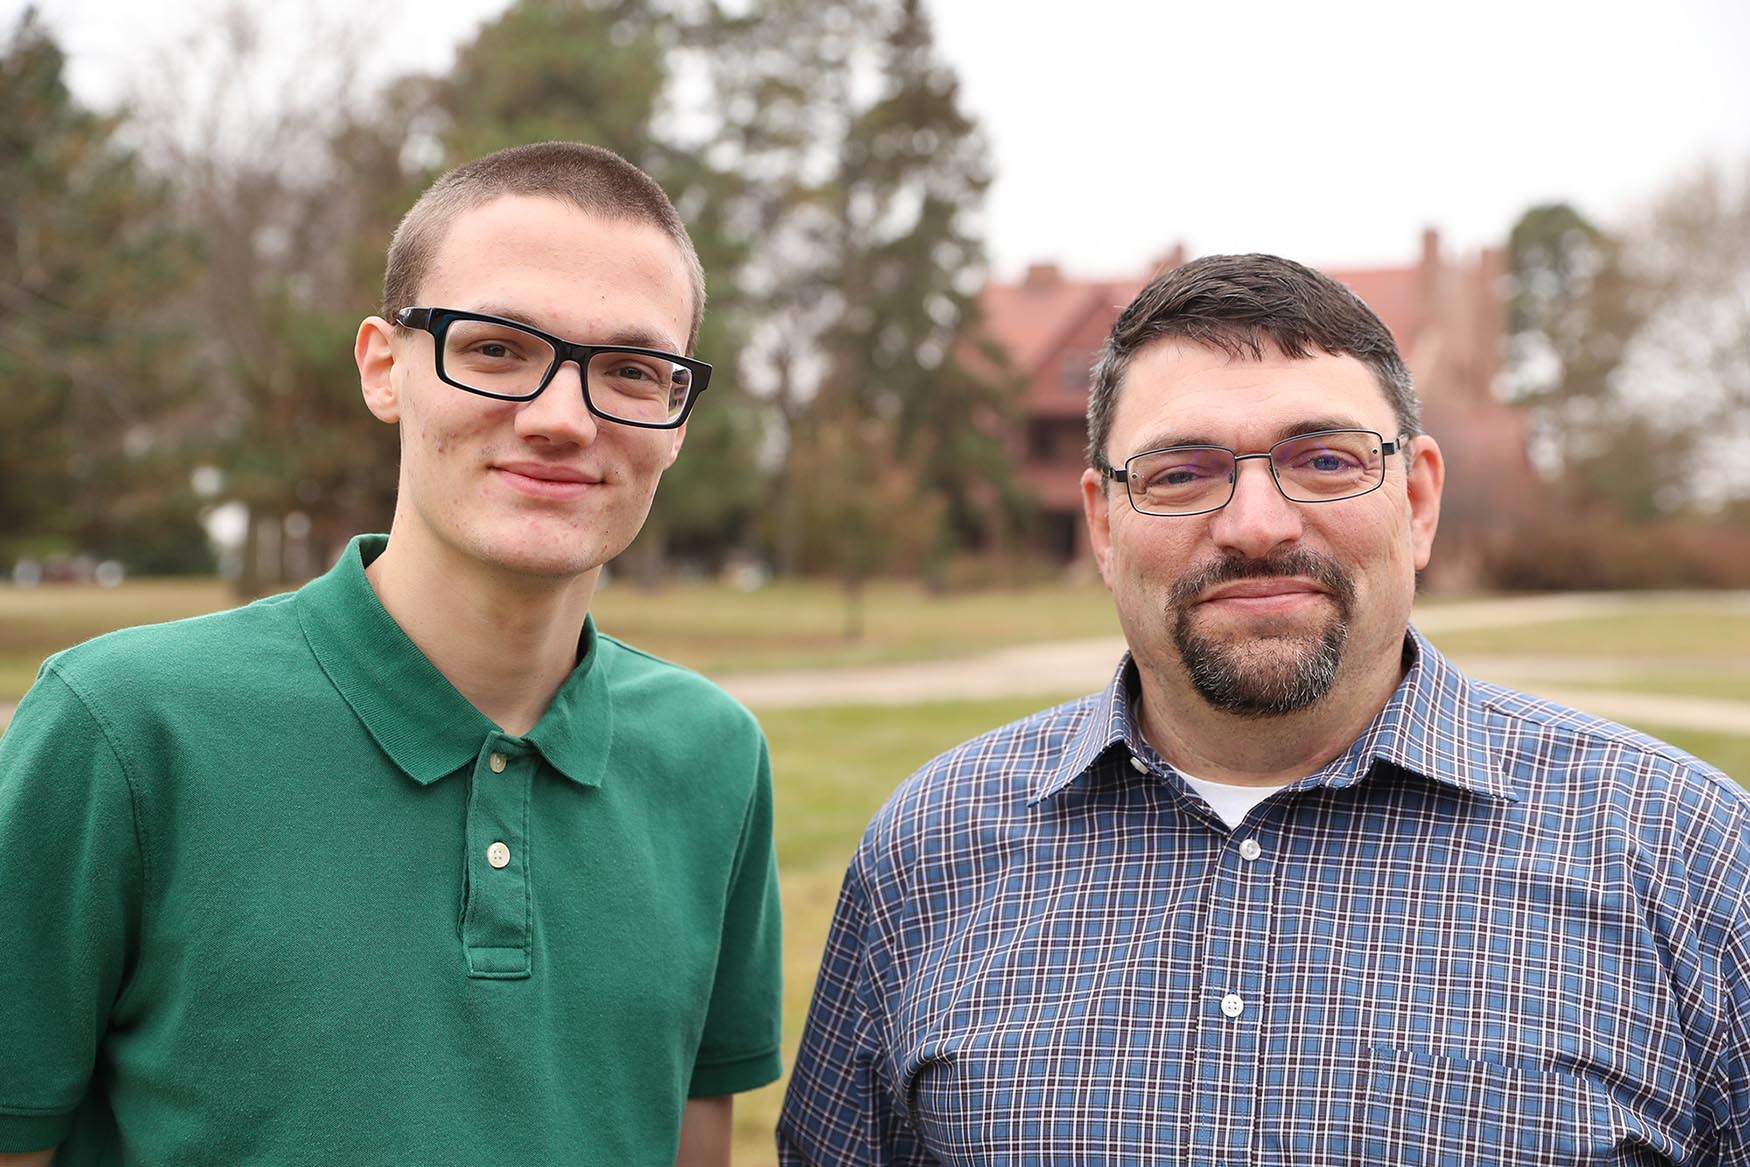 Phil Heun, right, and his son Joe both attend UNK using the military benefits Heun receives from his service in the U.S. Navy. (Photo by Corbey R. Dorsey, UNK Communications)